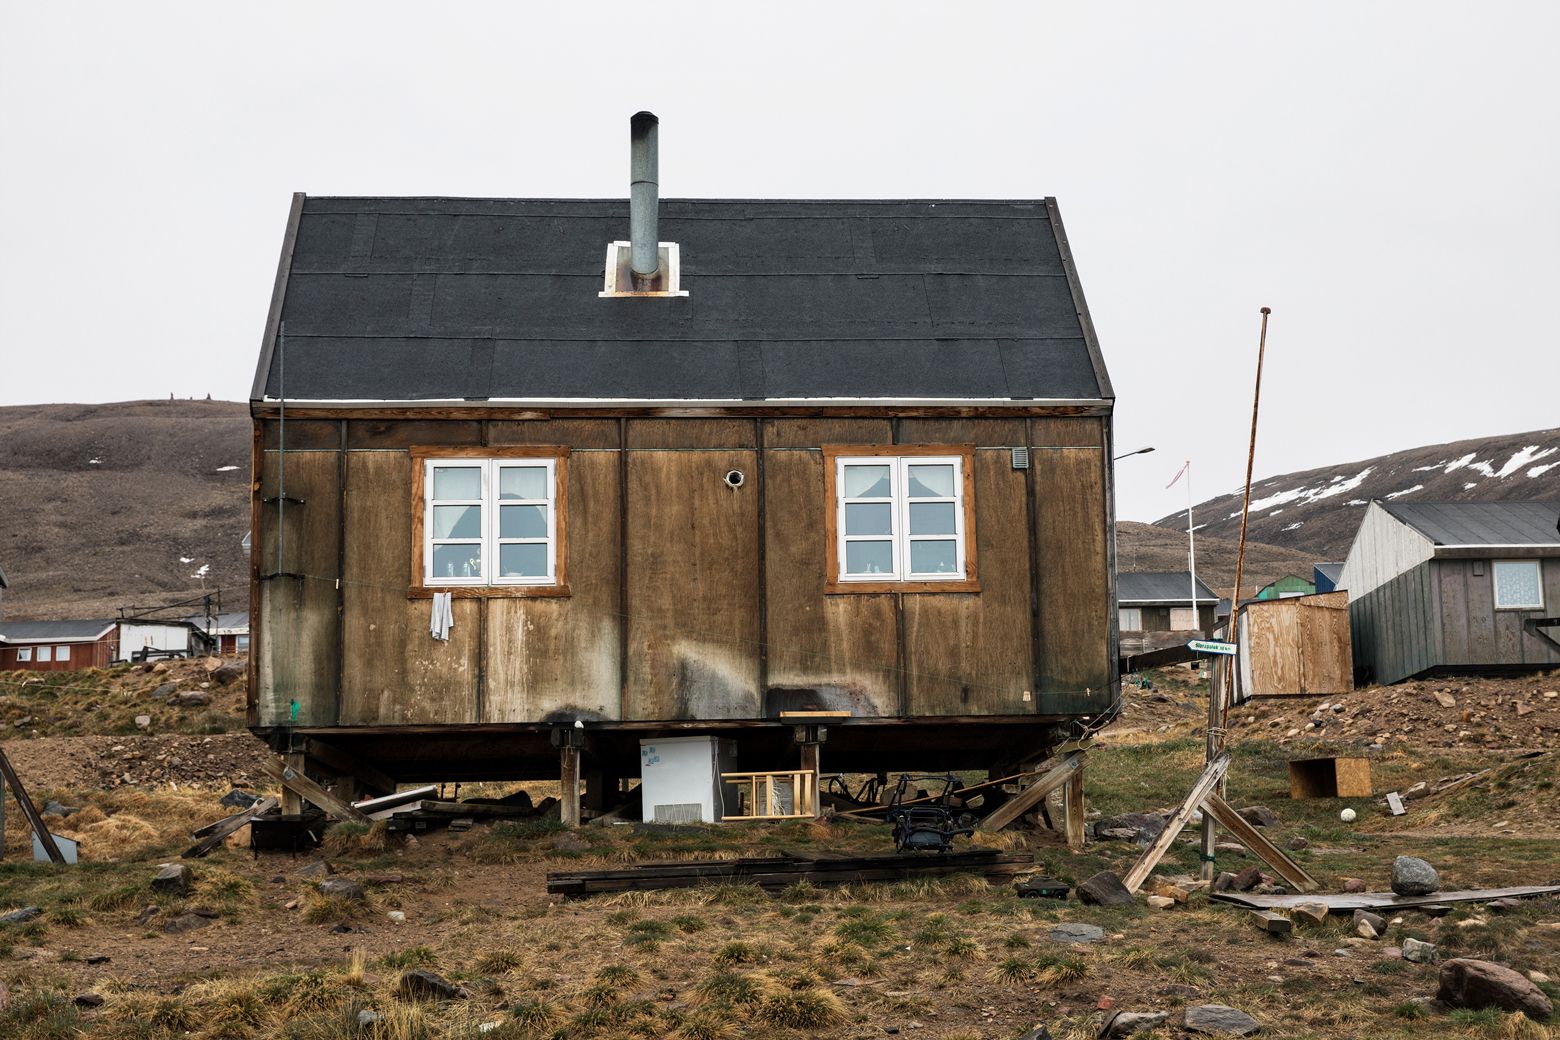 While average temperatures globally have increased by about 1C (1.8F), near the North Pole, the warming has been closer to 3C (5.4F). Image by Anna Filipova. Greenland, 2018.